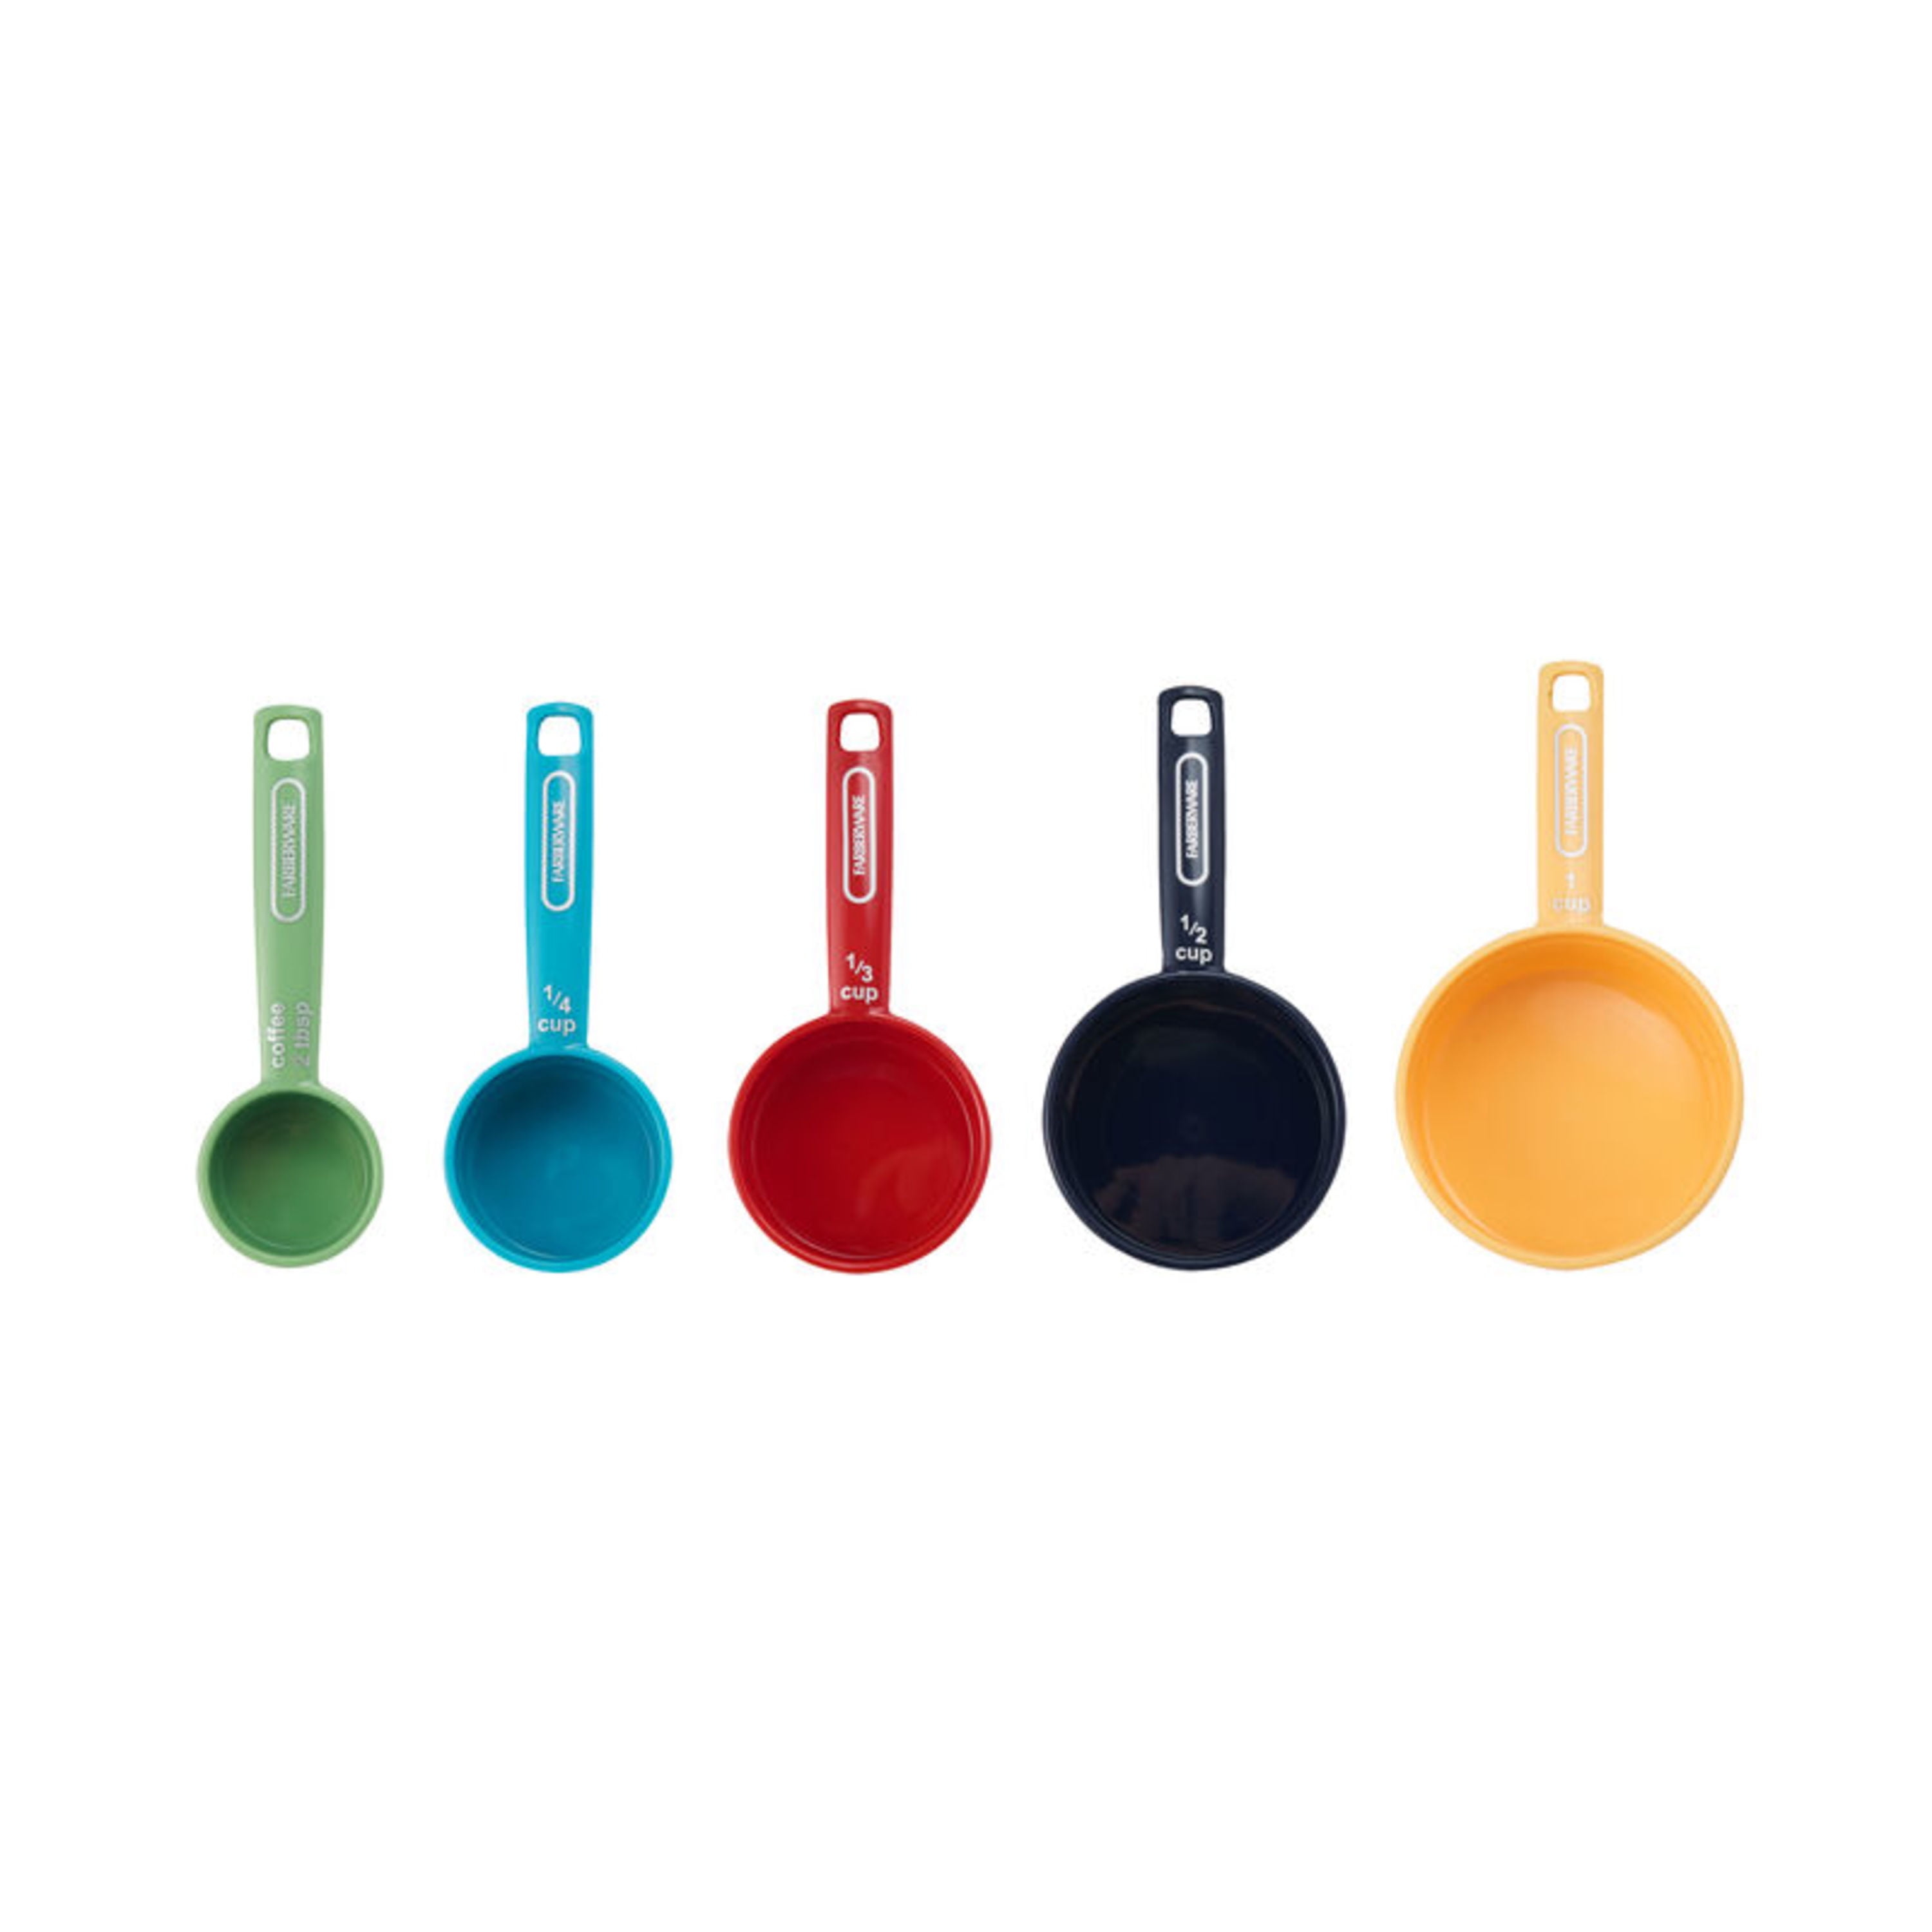 Professional Plastic Measuring Cups with Coffee Spoon, Set of 5